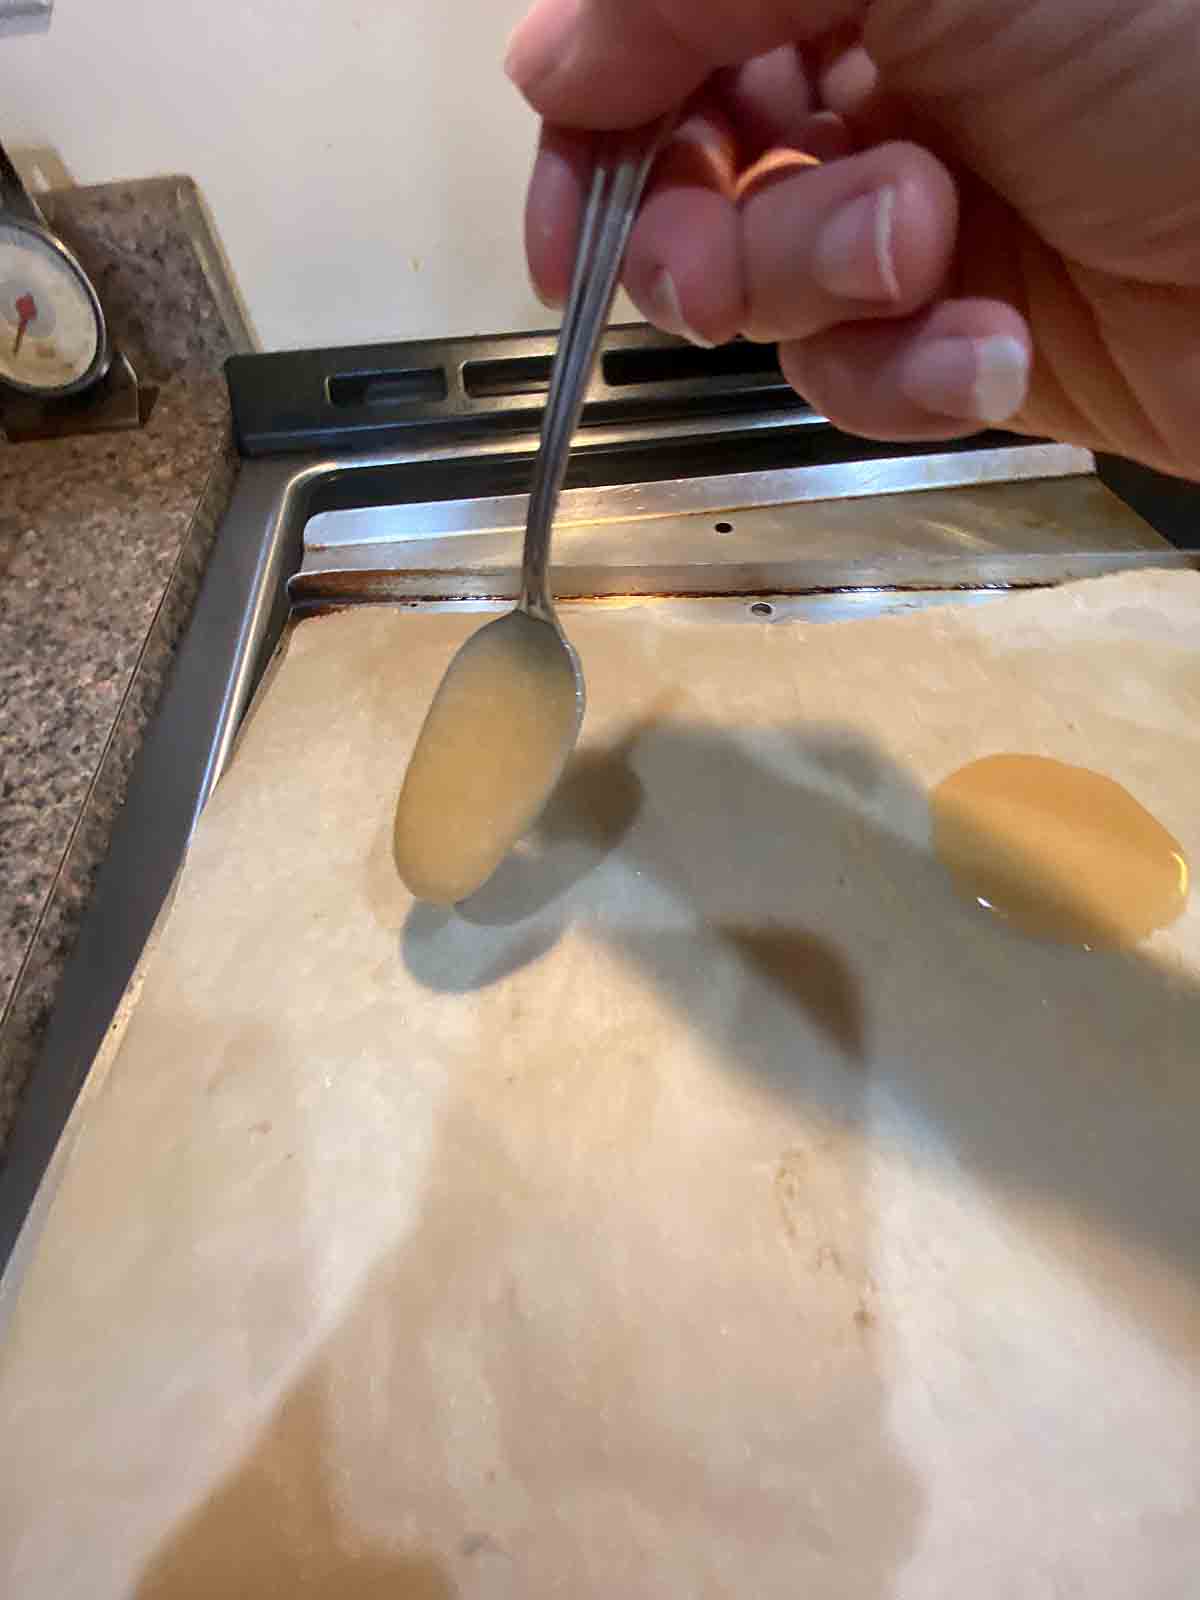 Drop spoonfuls on parchment lined baking sheeet